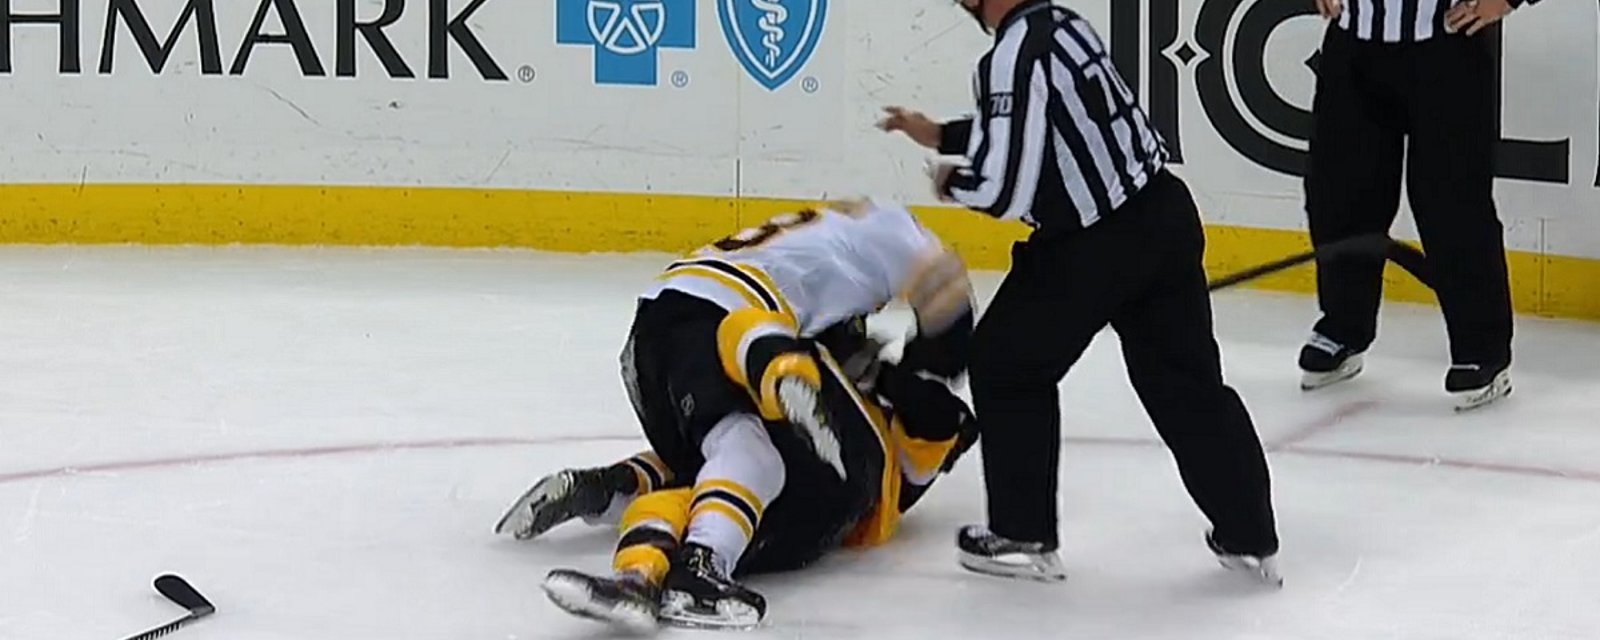 Brad Marchand and Kris Letang rough each other up behind the play.